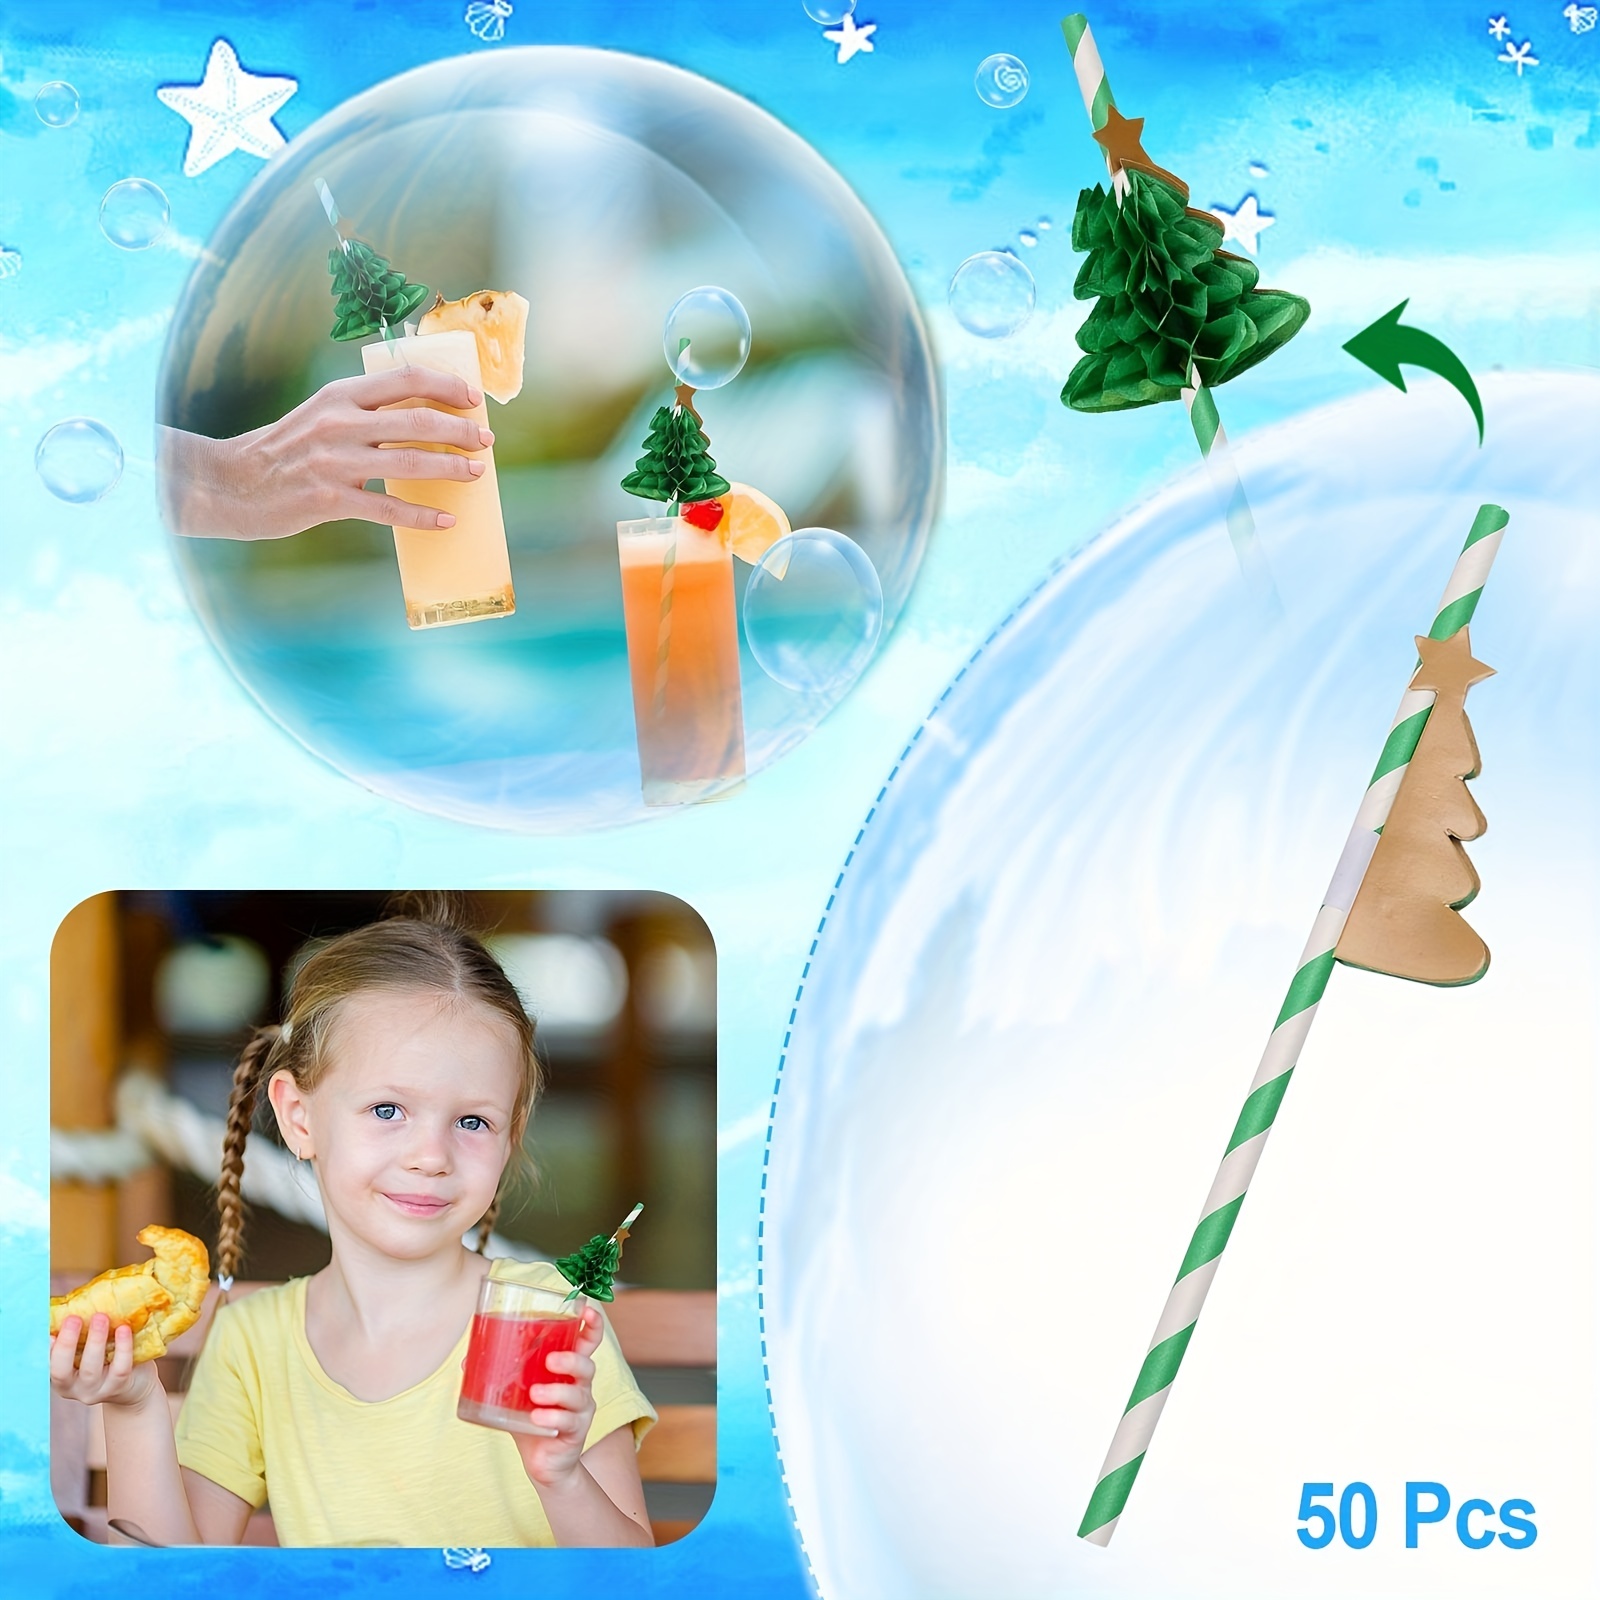 Paper Straws,Biodegradable Paper Straws,Drinking Straws Disposable  Degradable Paper Straw Beverage Party Dessert Cake Decoration(200pc) for  Party